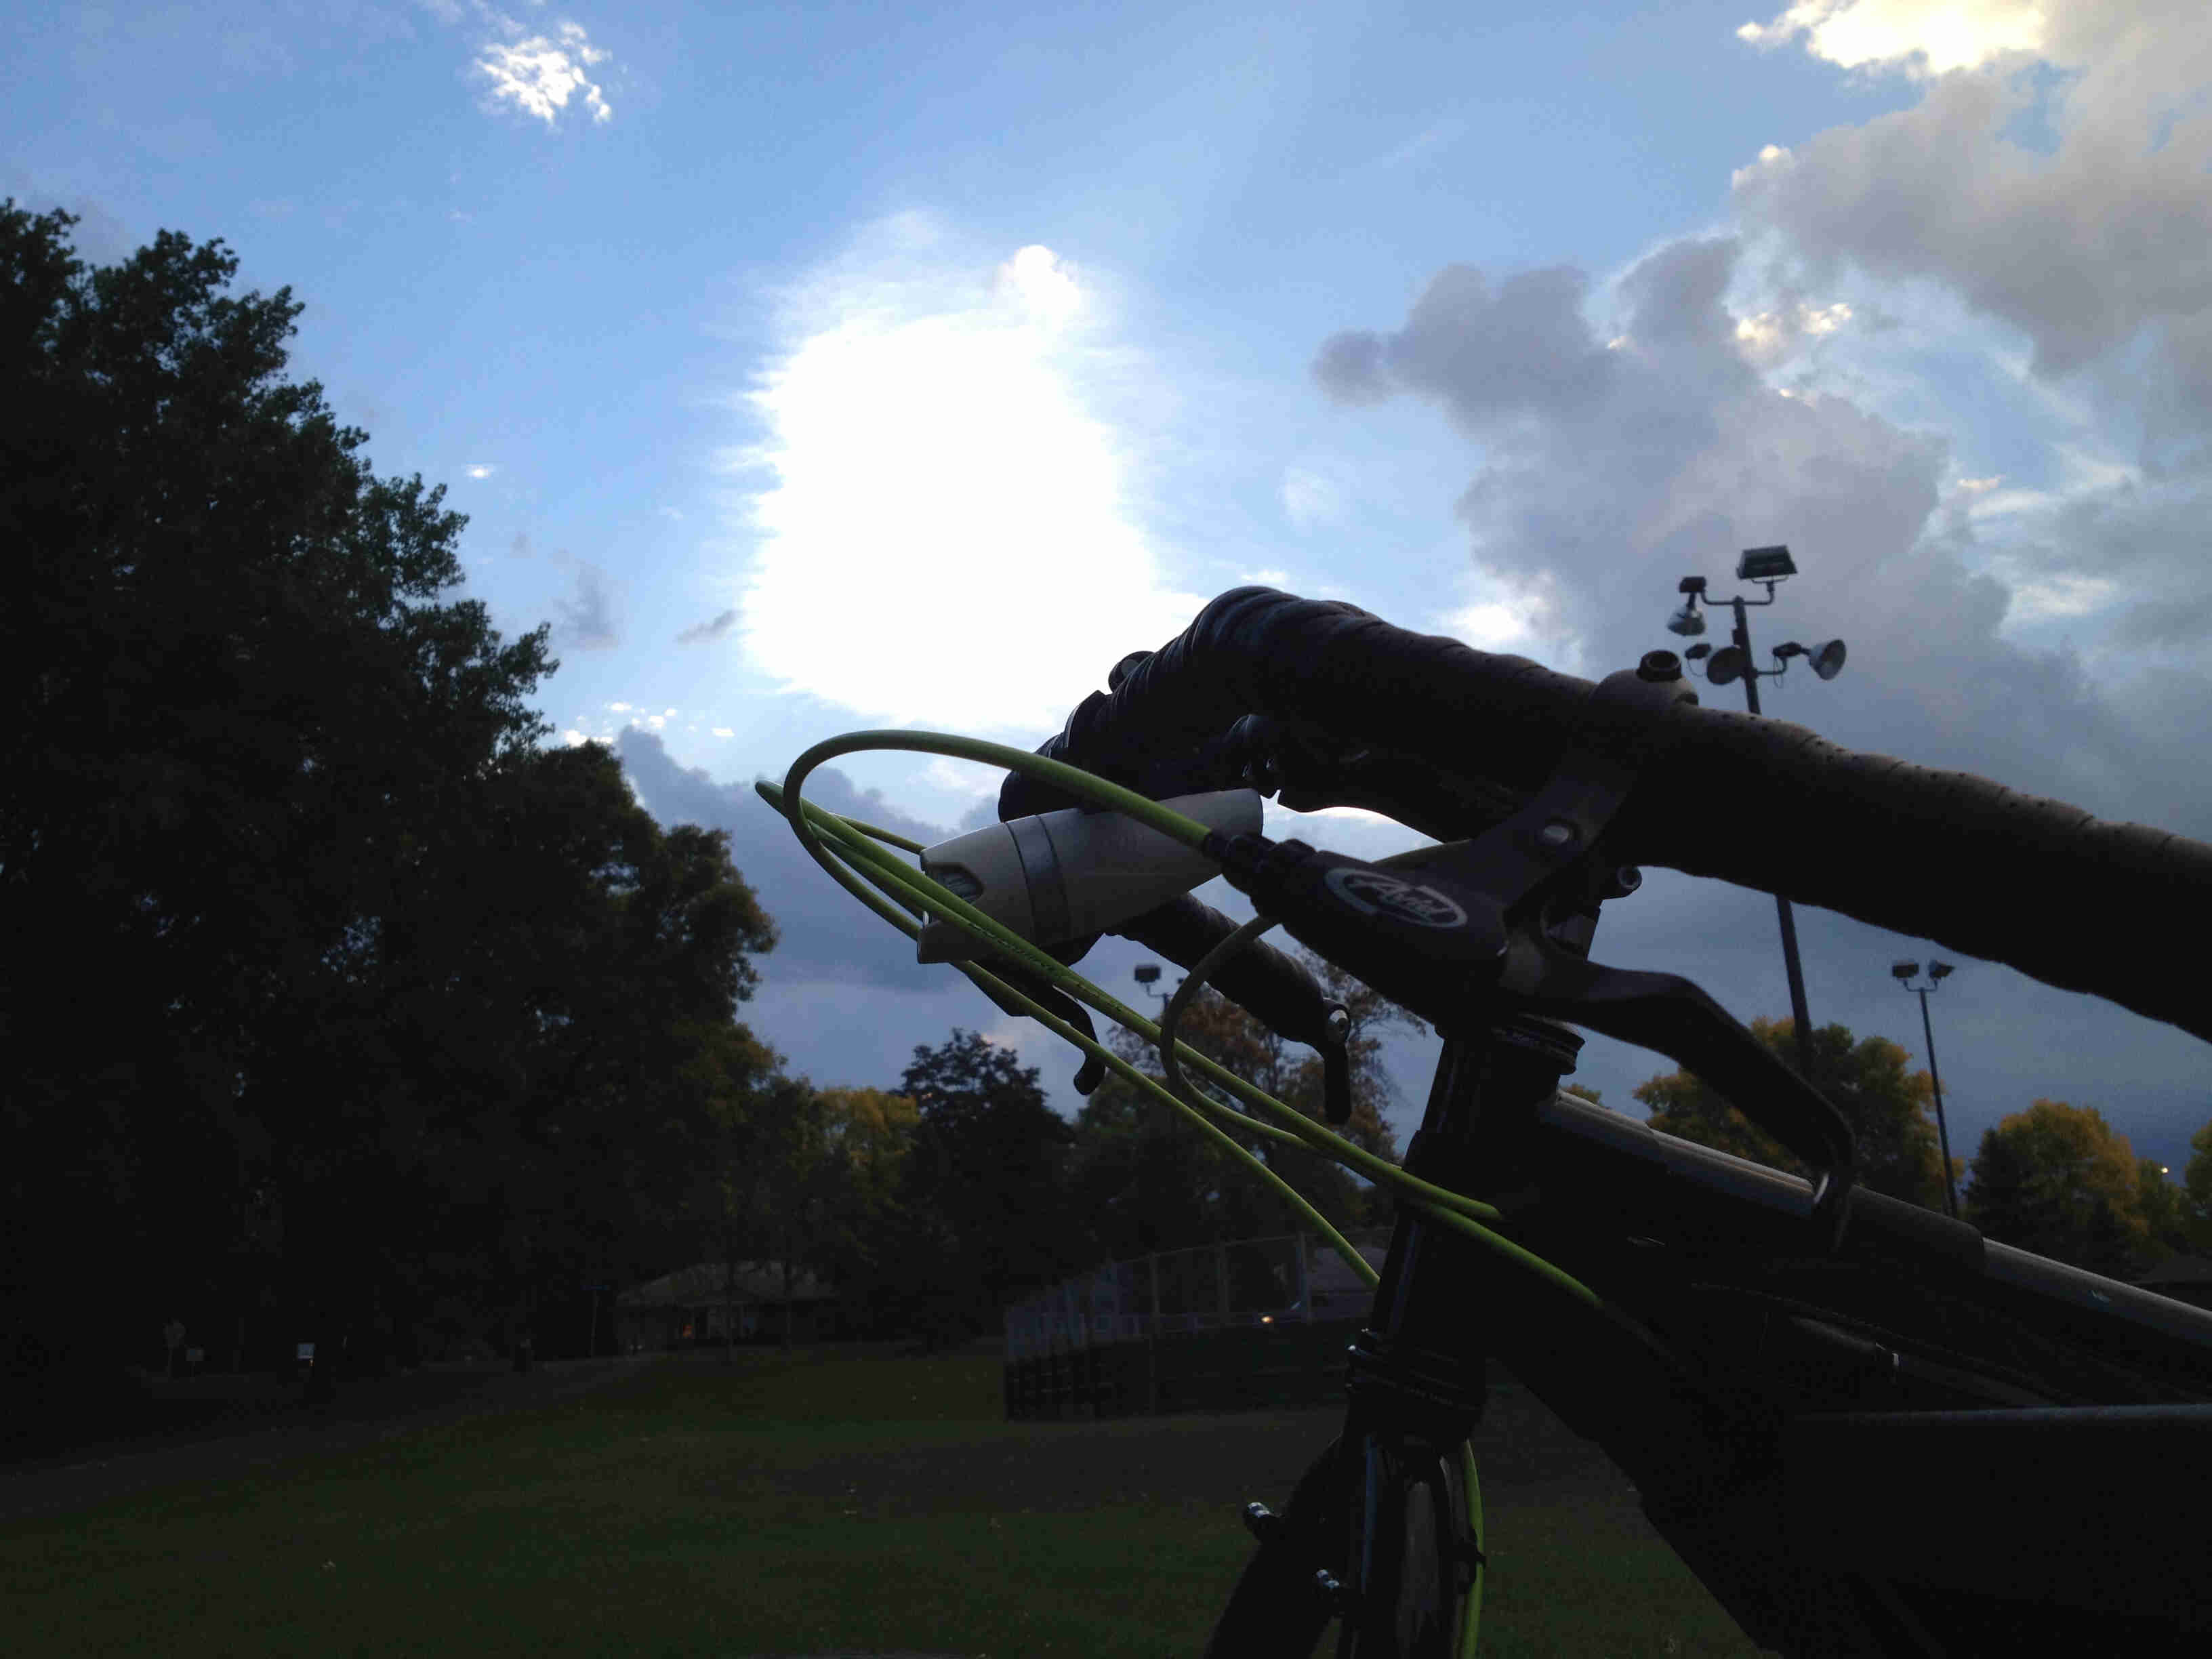 A dimly lit view of the upper, front part of a Surly bike, parked in a grass playing field with trees in the background